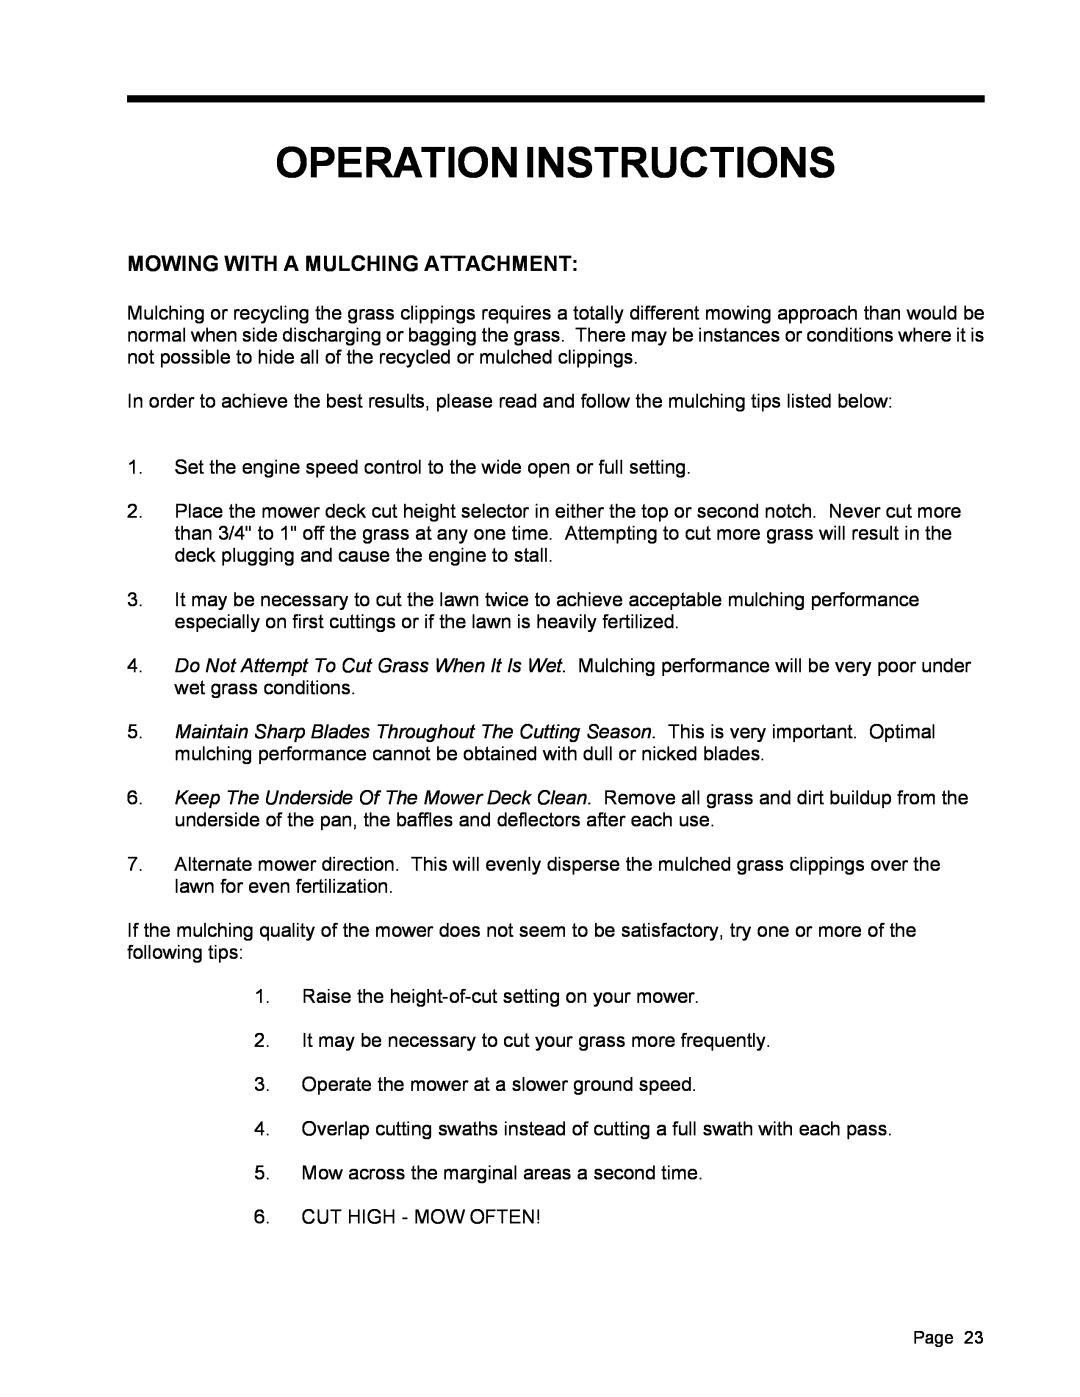 Dixon ZTR 5017, ZTR 5022 manual Operation Instructions, Mowing With A Mulching Attachment 